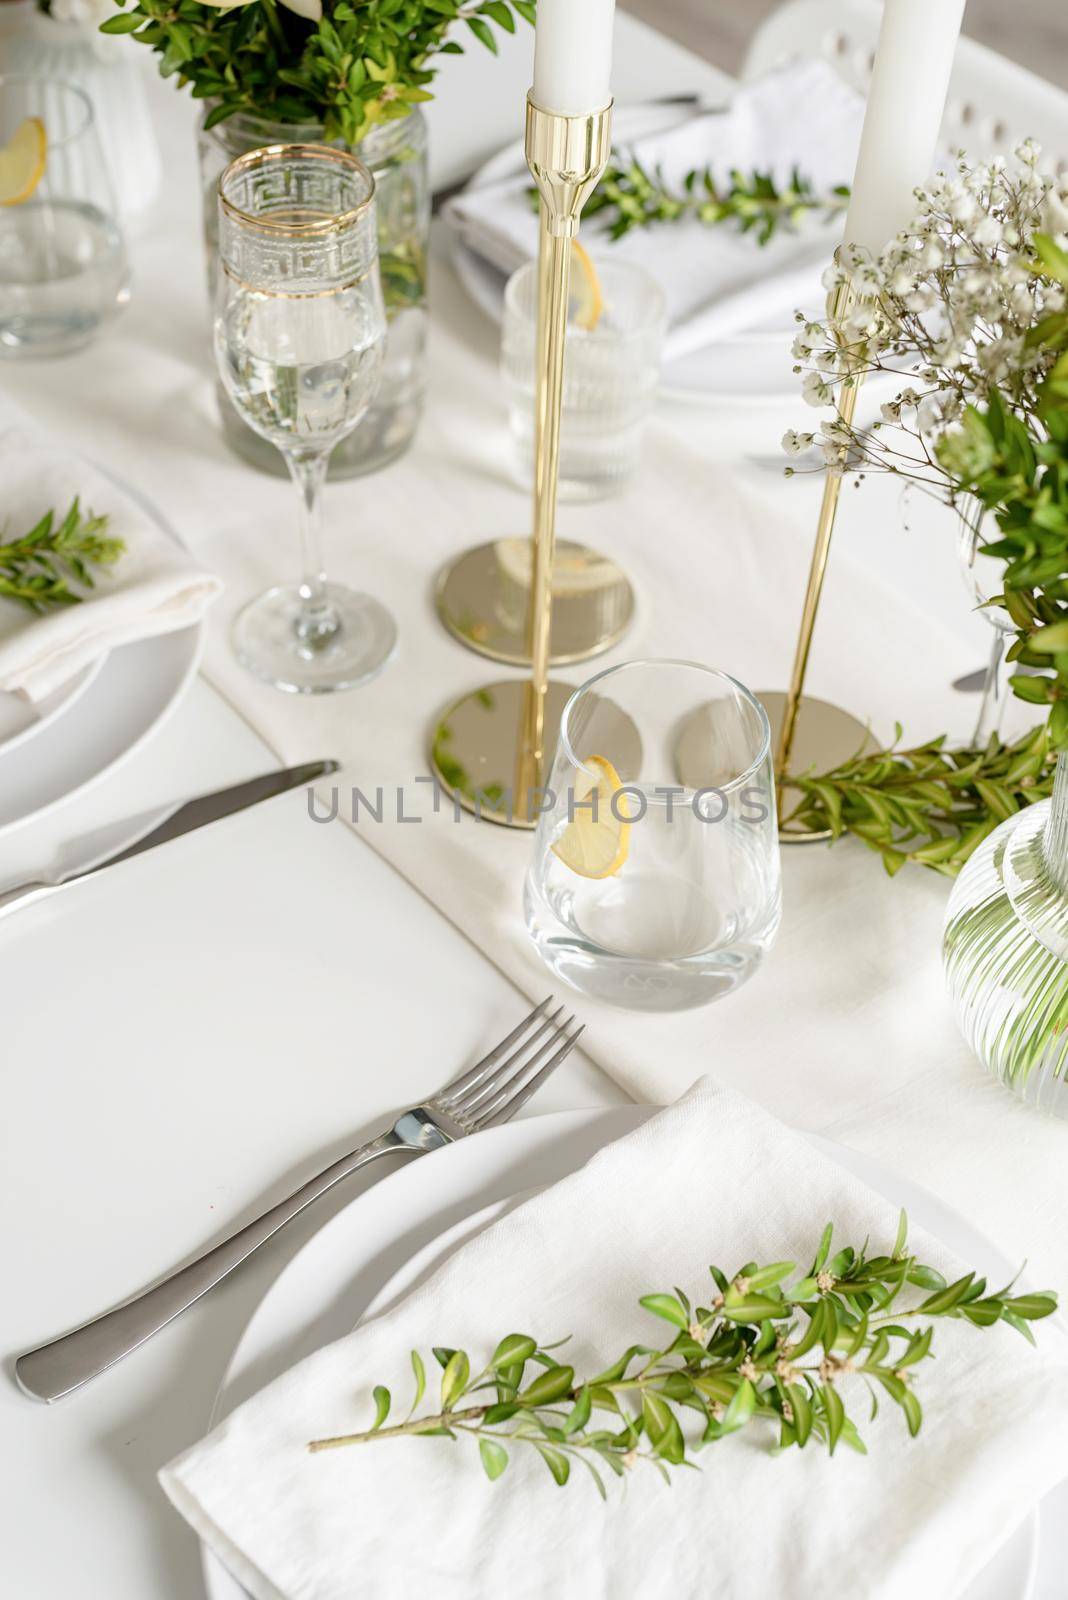 The wedding decor. Wedding table decoration with white roses by Desperada